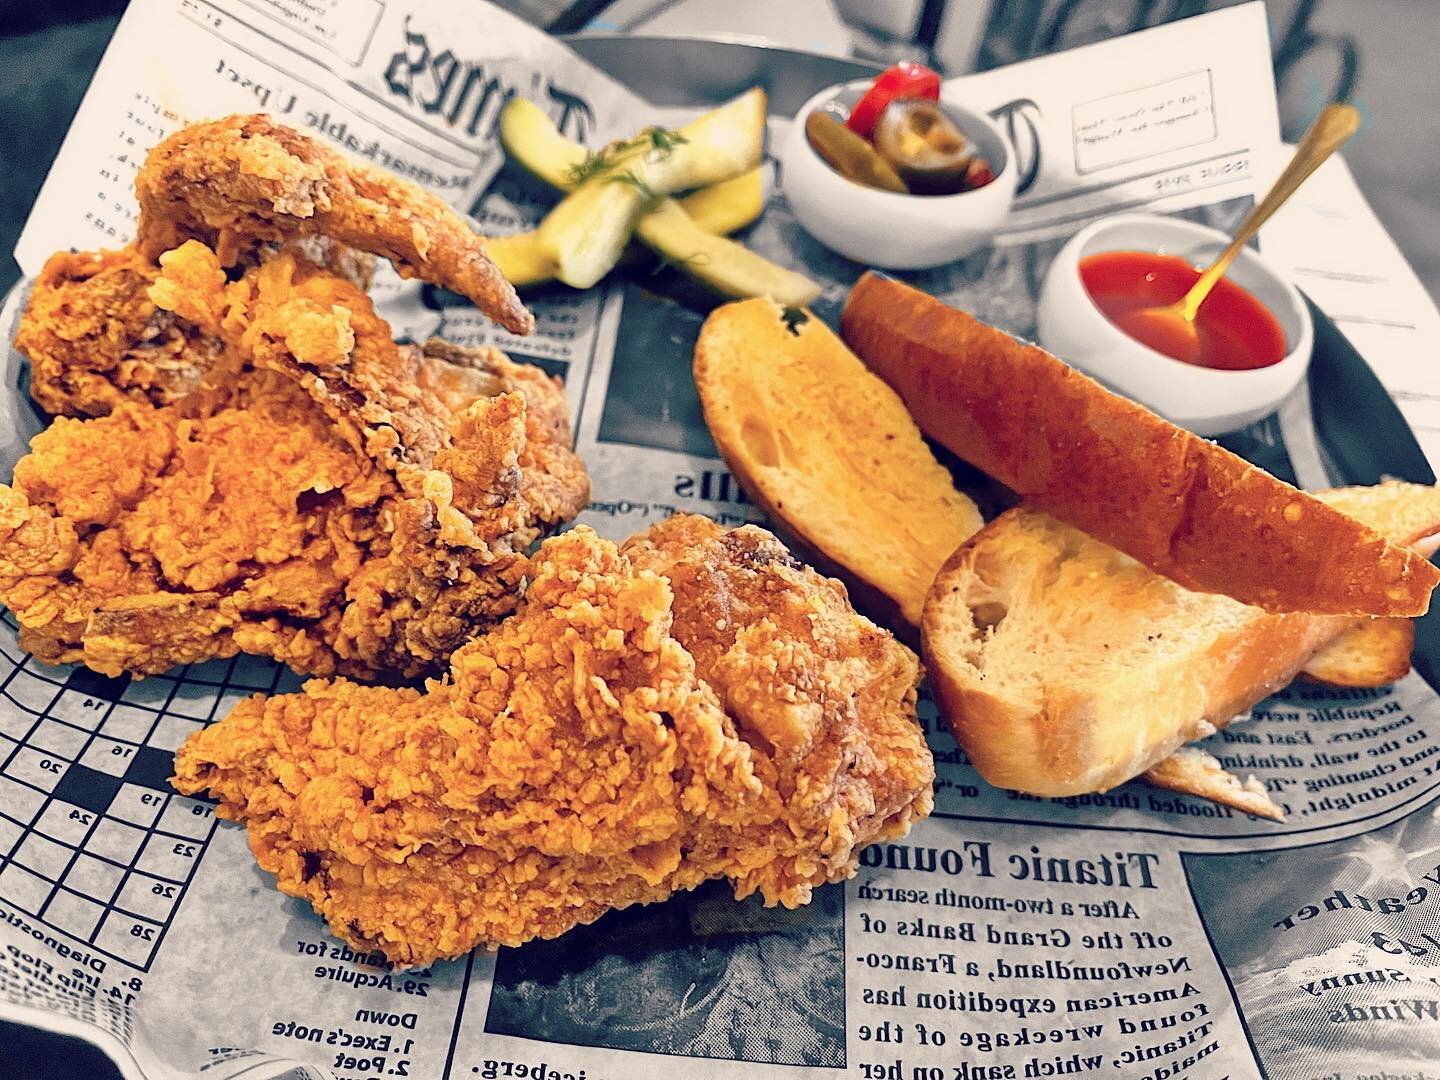 There&rsquo;s something to be said about Fried Chicken + Sundays.  Check out our Sunday Fried Chicken Special and @inspiredmarkethtx @braverychefhall today! 🍽💐